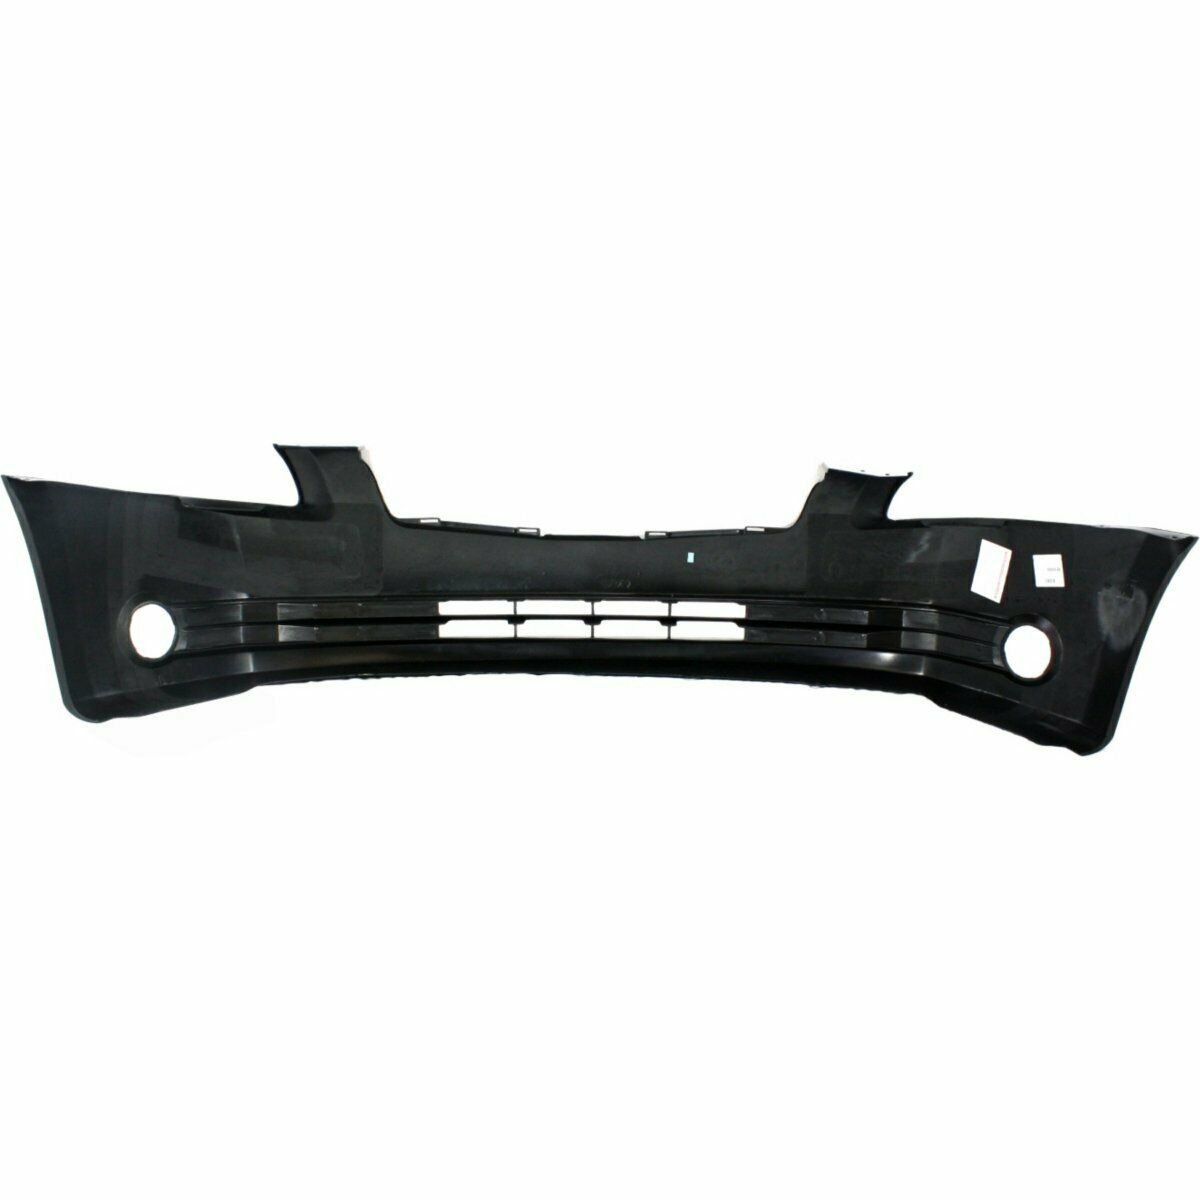 2004-2006 Nissan Maxima Front Bumper Painted to Match